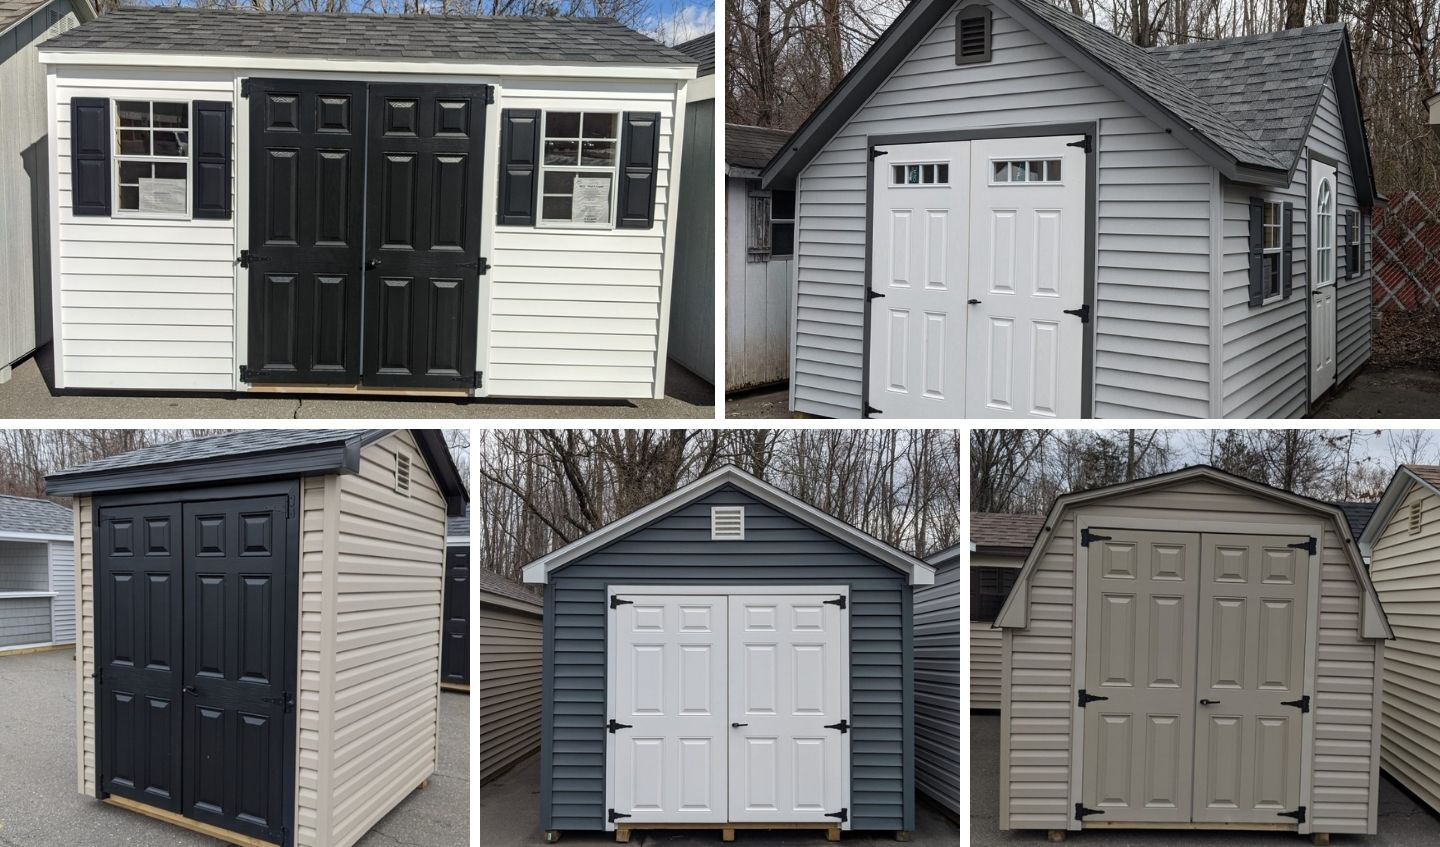 Best sheds with quality materials